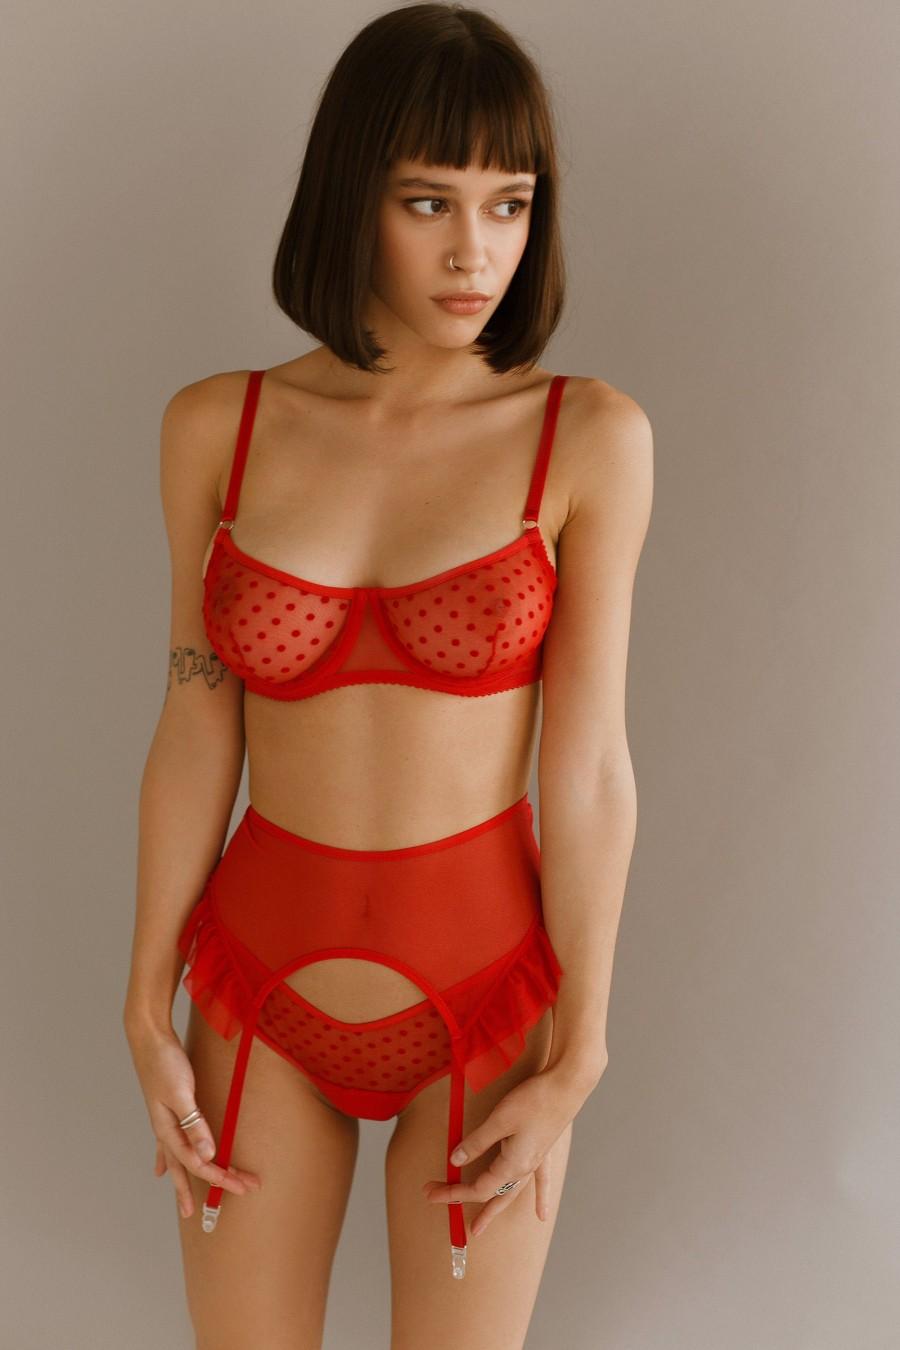 Wedding - valentines gift / valentines day / st valentines / see through lingerie / red lingerie / sexy lingerie  / erotic lingerie / sheer lingerie